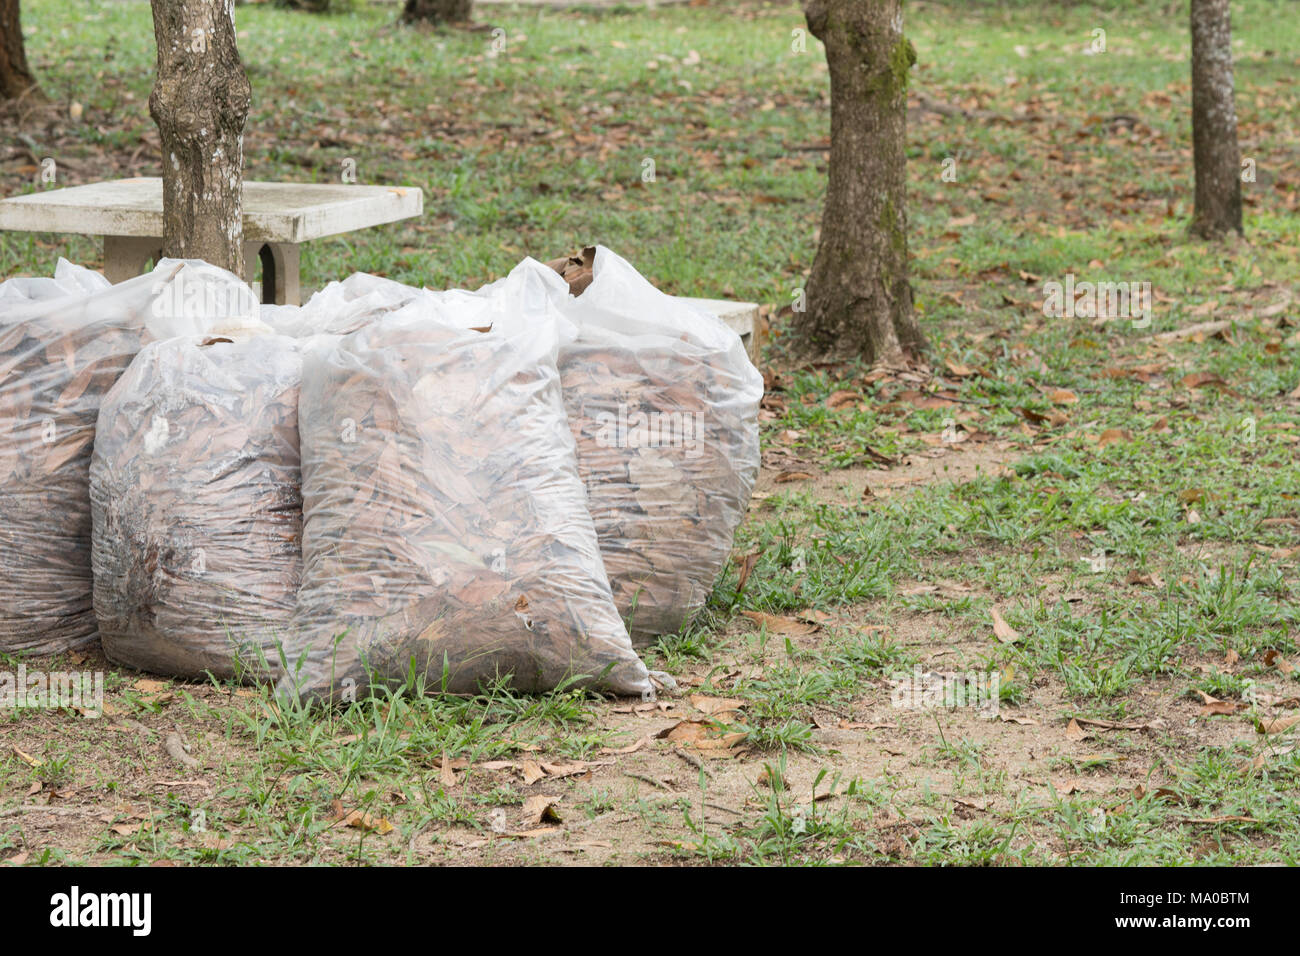 Autumn cleaning leaves,Pile of full white garbage bags on the grass in the park,leaves in bag garbage Stock Photo